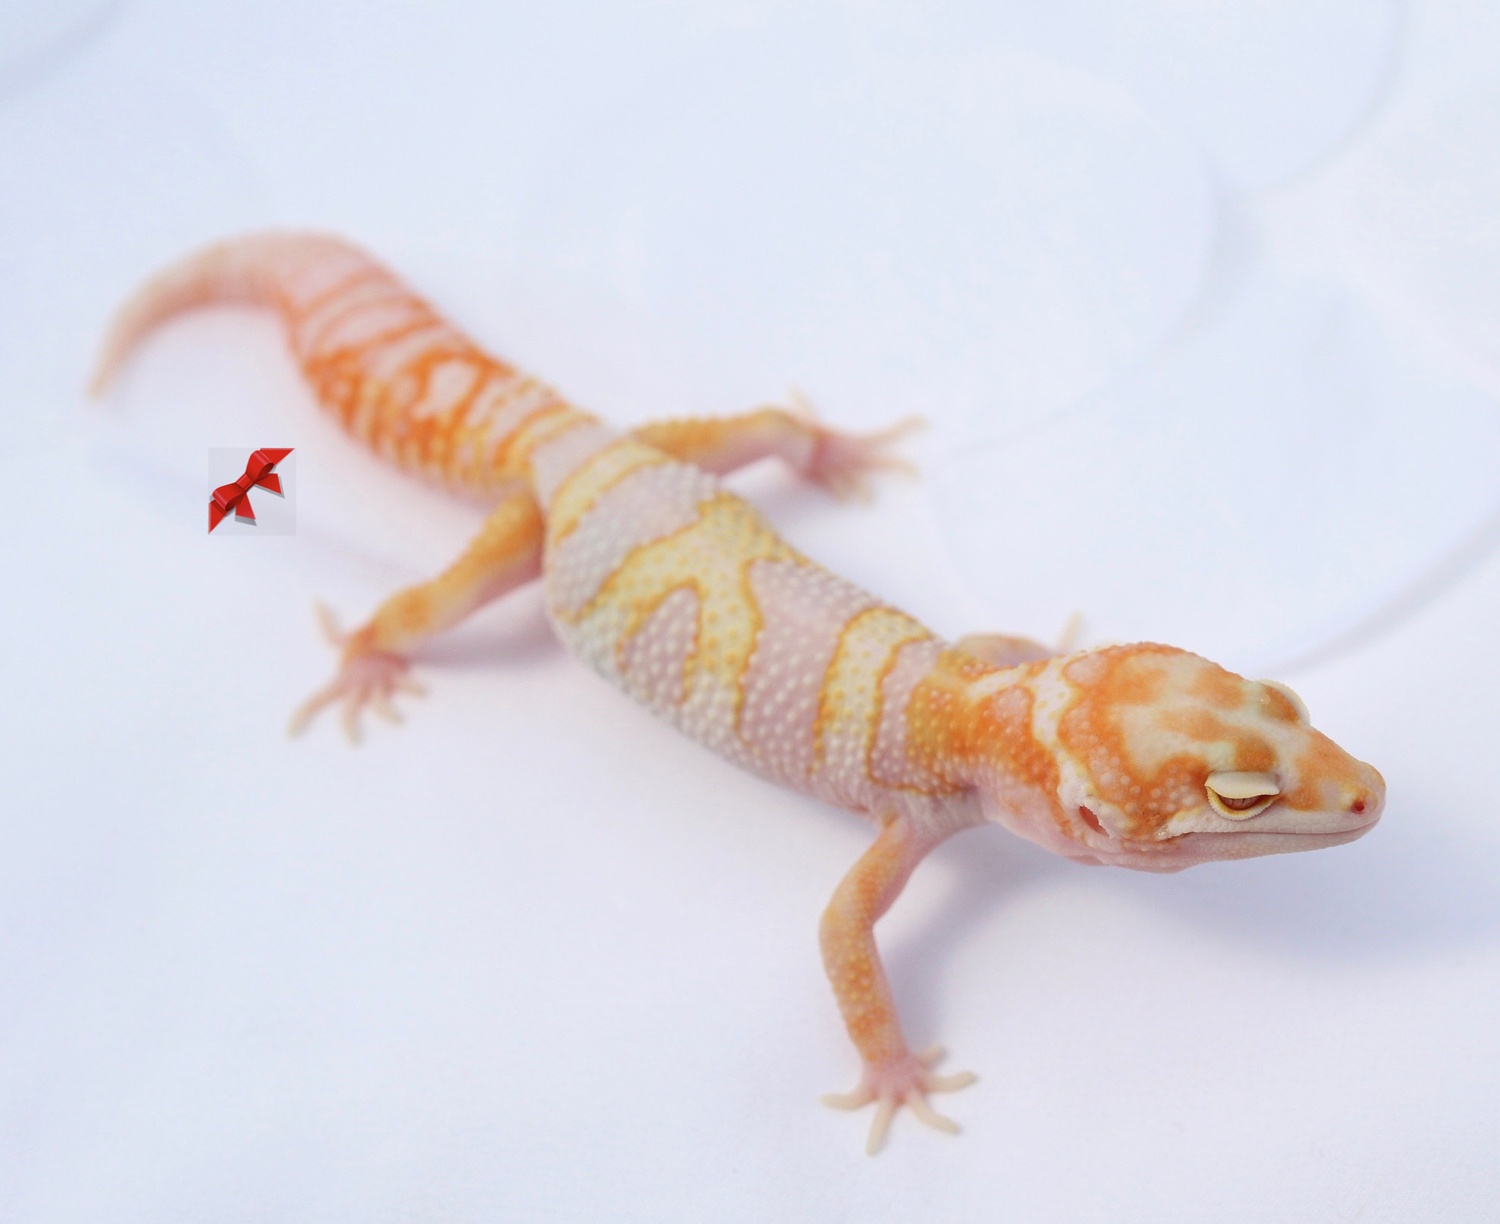 White & Yellow Carrot Head Tremper, Ph Eclipse Leopard Gecko by Bold & Bright Geckos